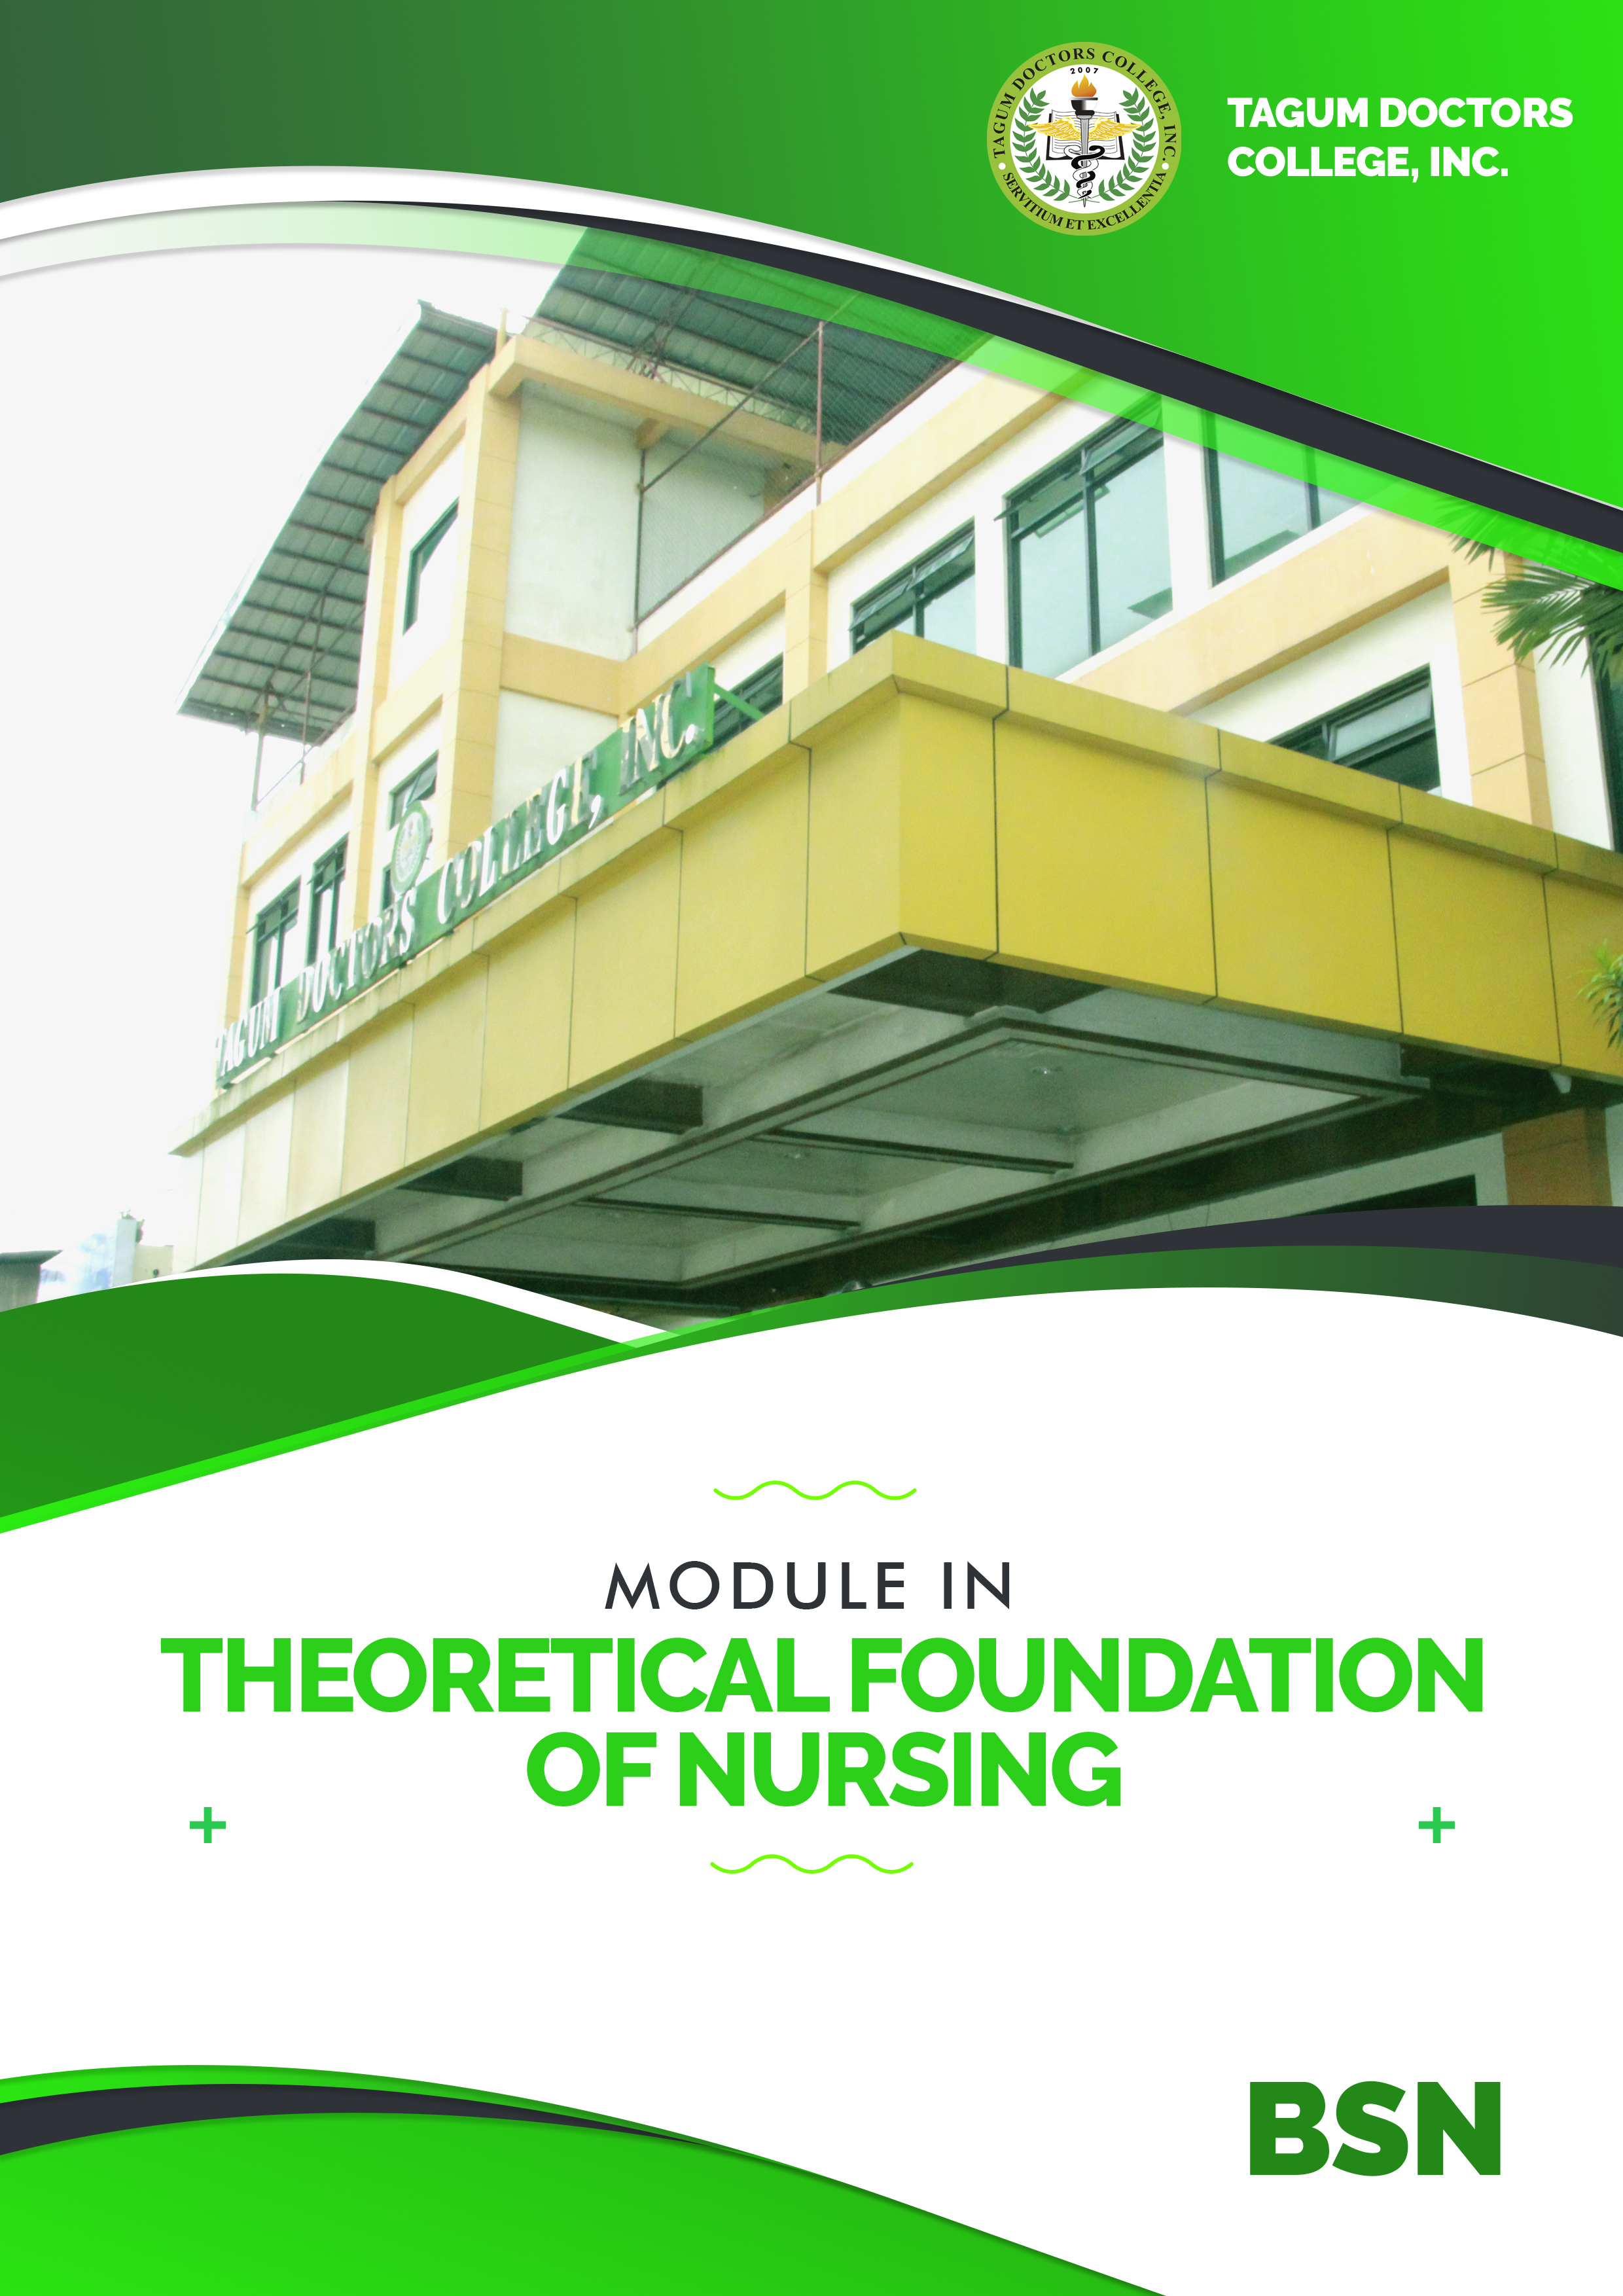 Theoretical Foundations of Nursing - BSN 1-A